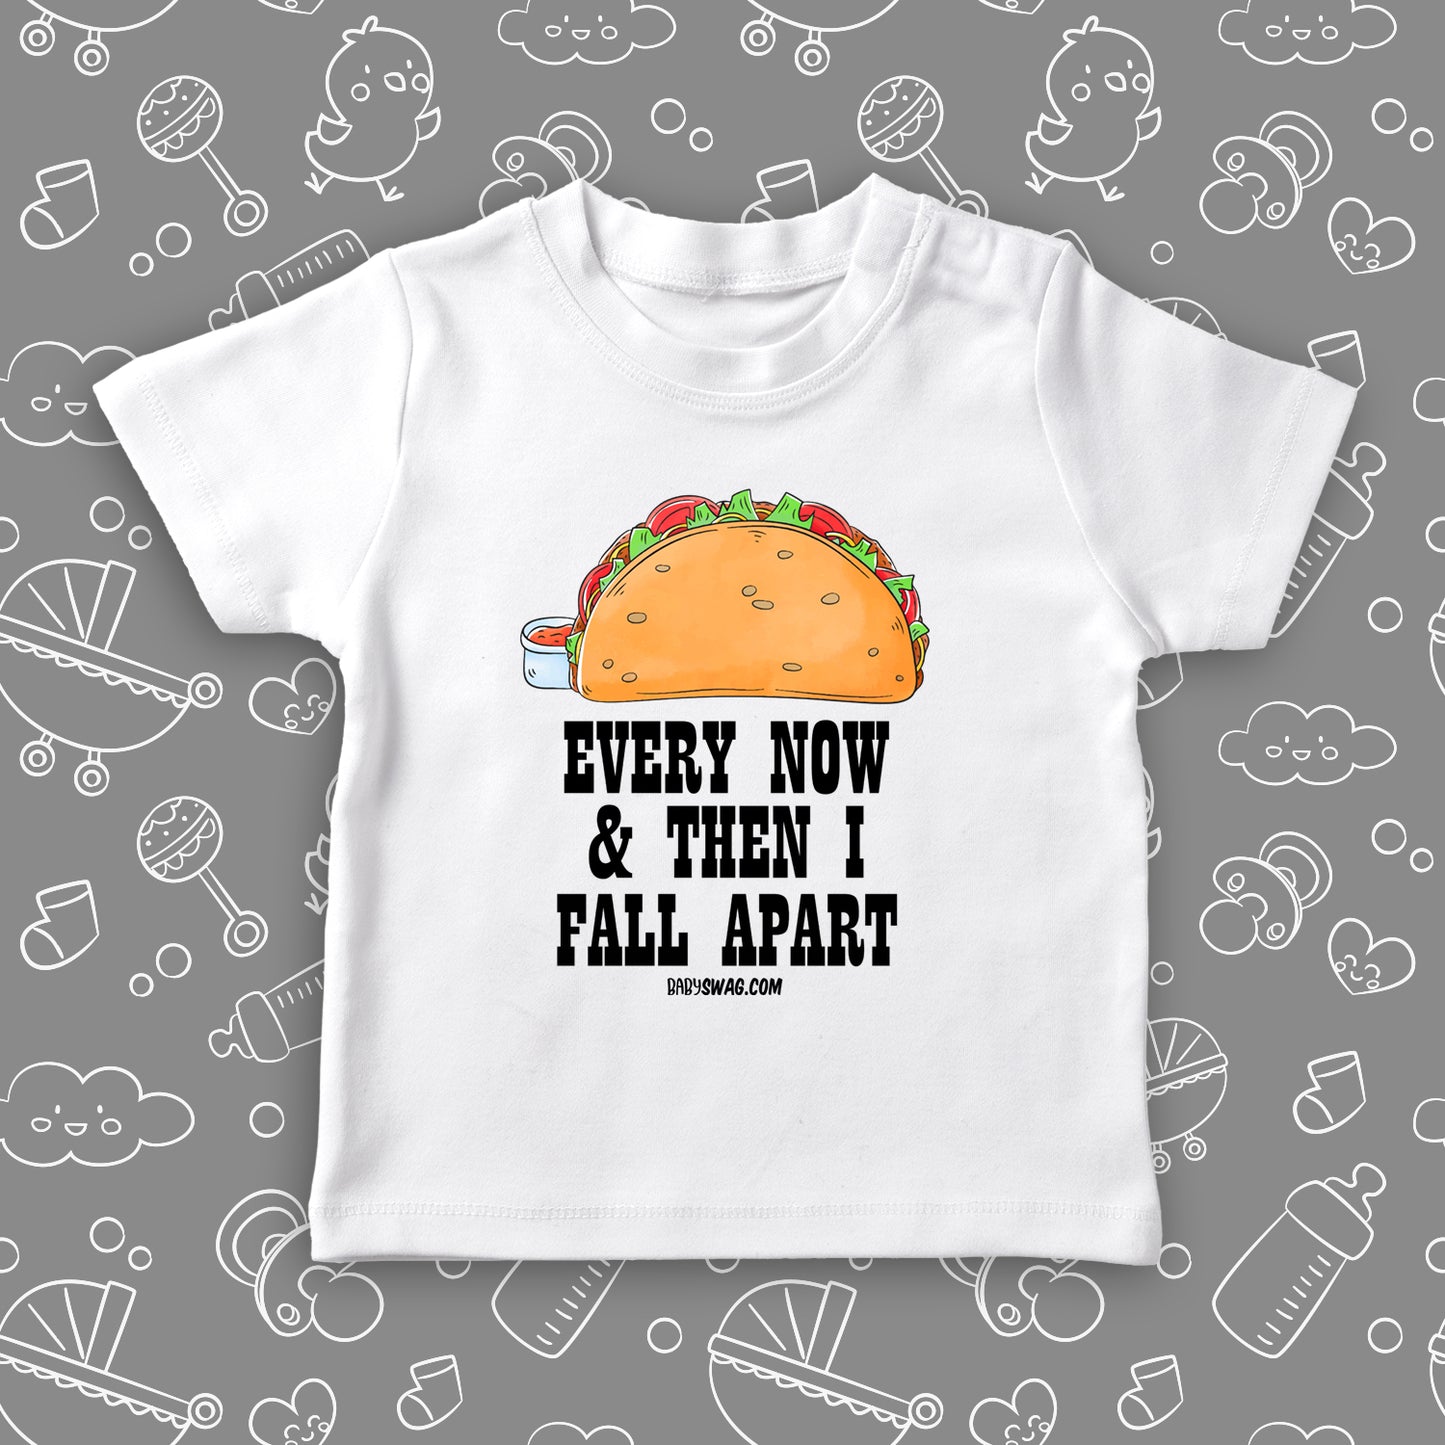 Funny toddler shirt with taco image and print: "Every now and then I fall apart", color white. 